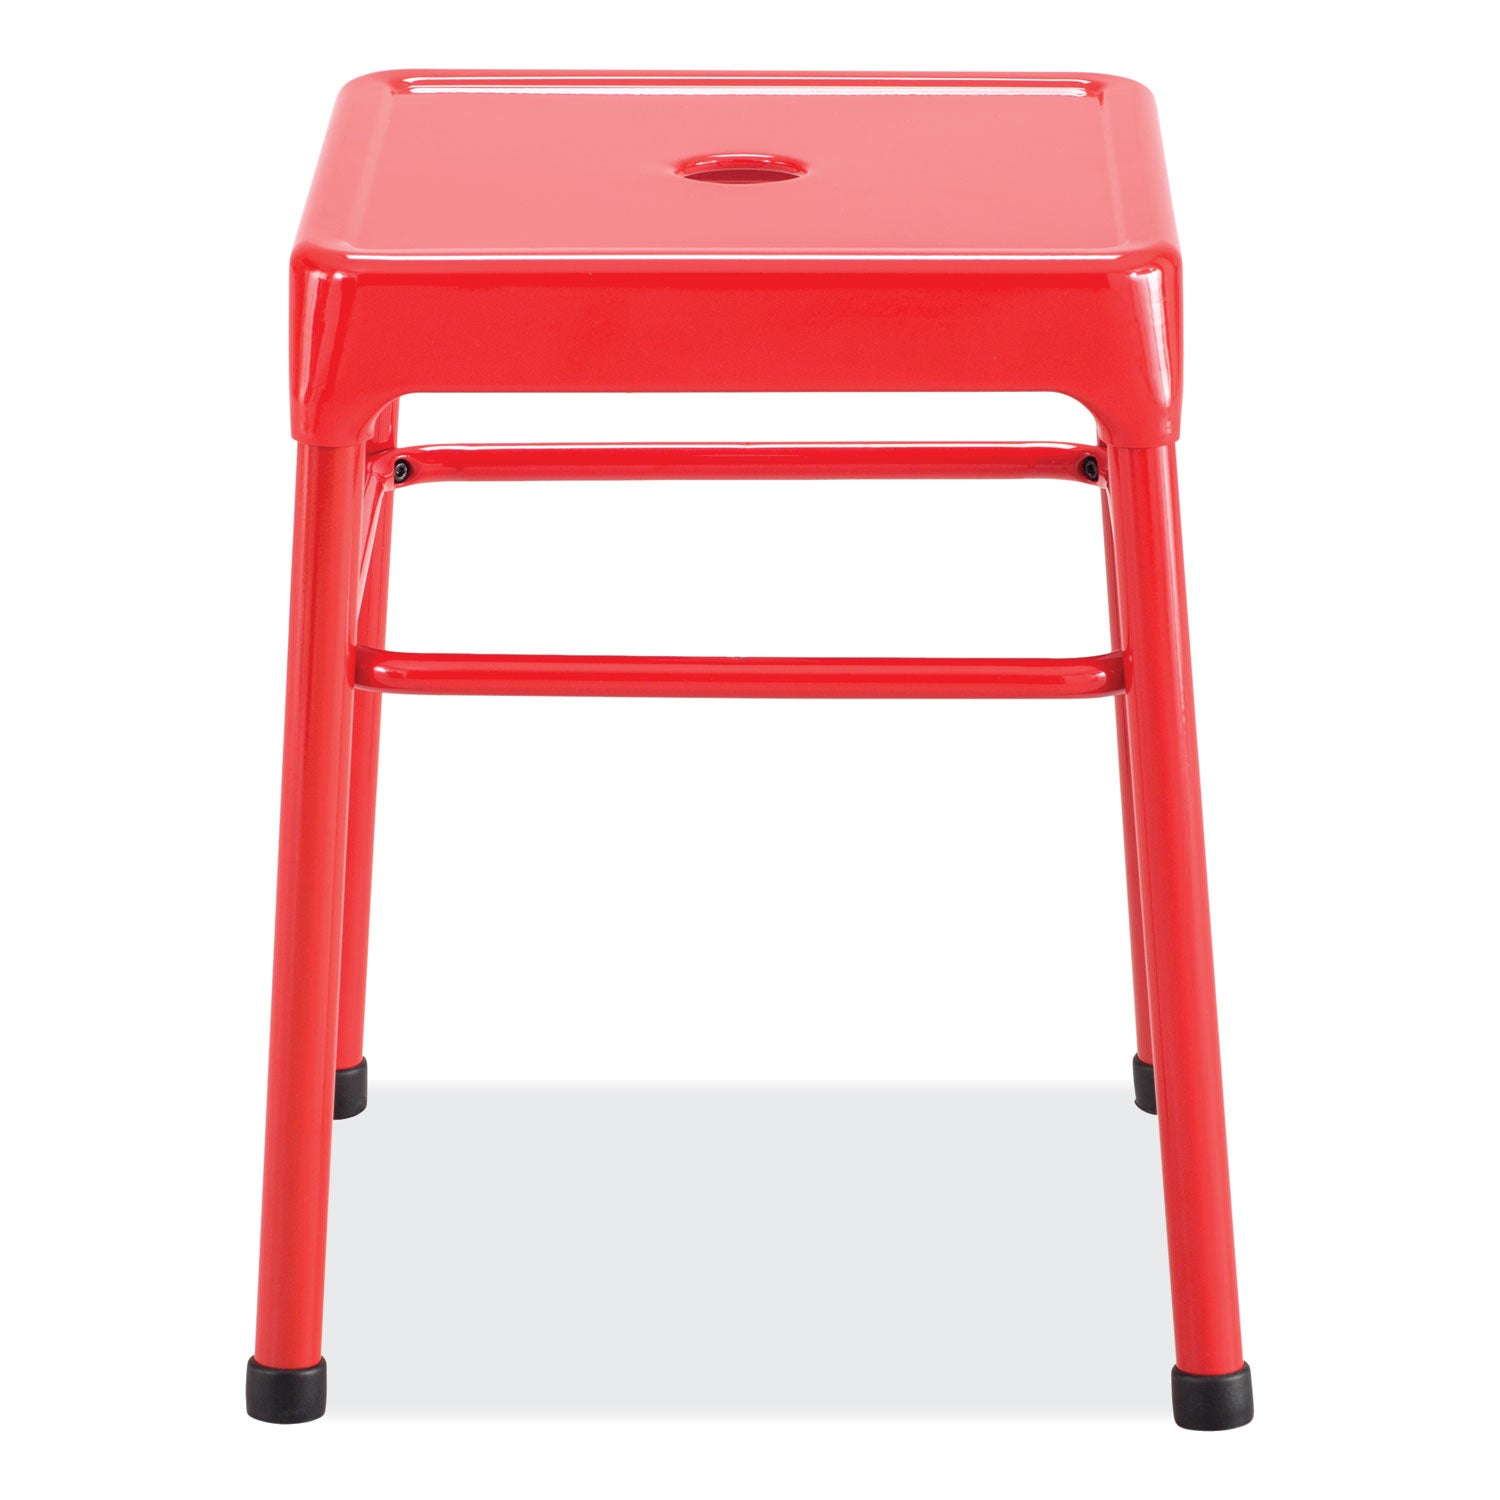 steel-guestbistro-stool-backless-supports-up-to-250-lb-18-seat-height-red-seat-red-base-ships-in-1-3-business-days_saf6604rd - 6